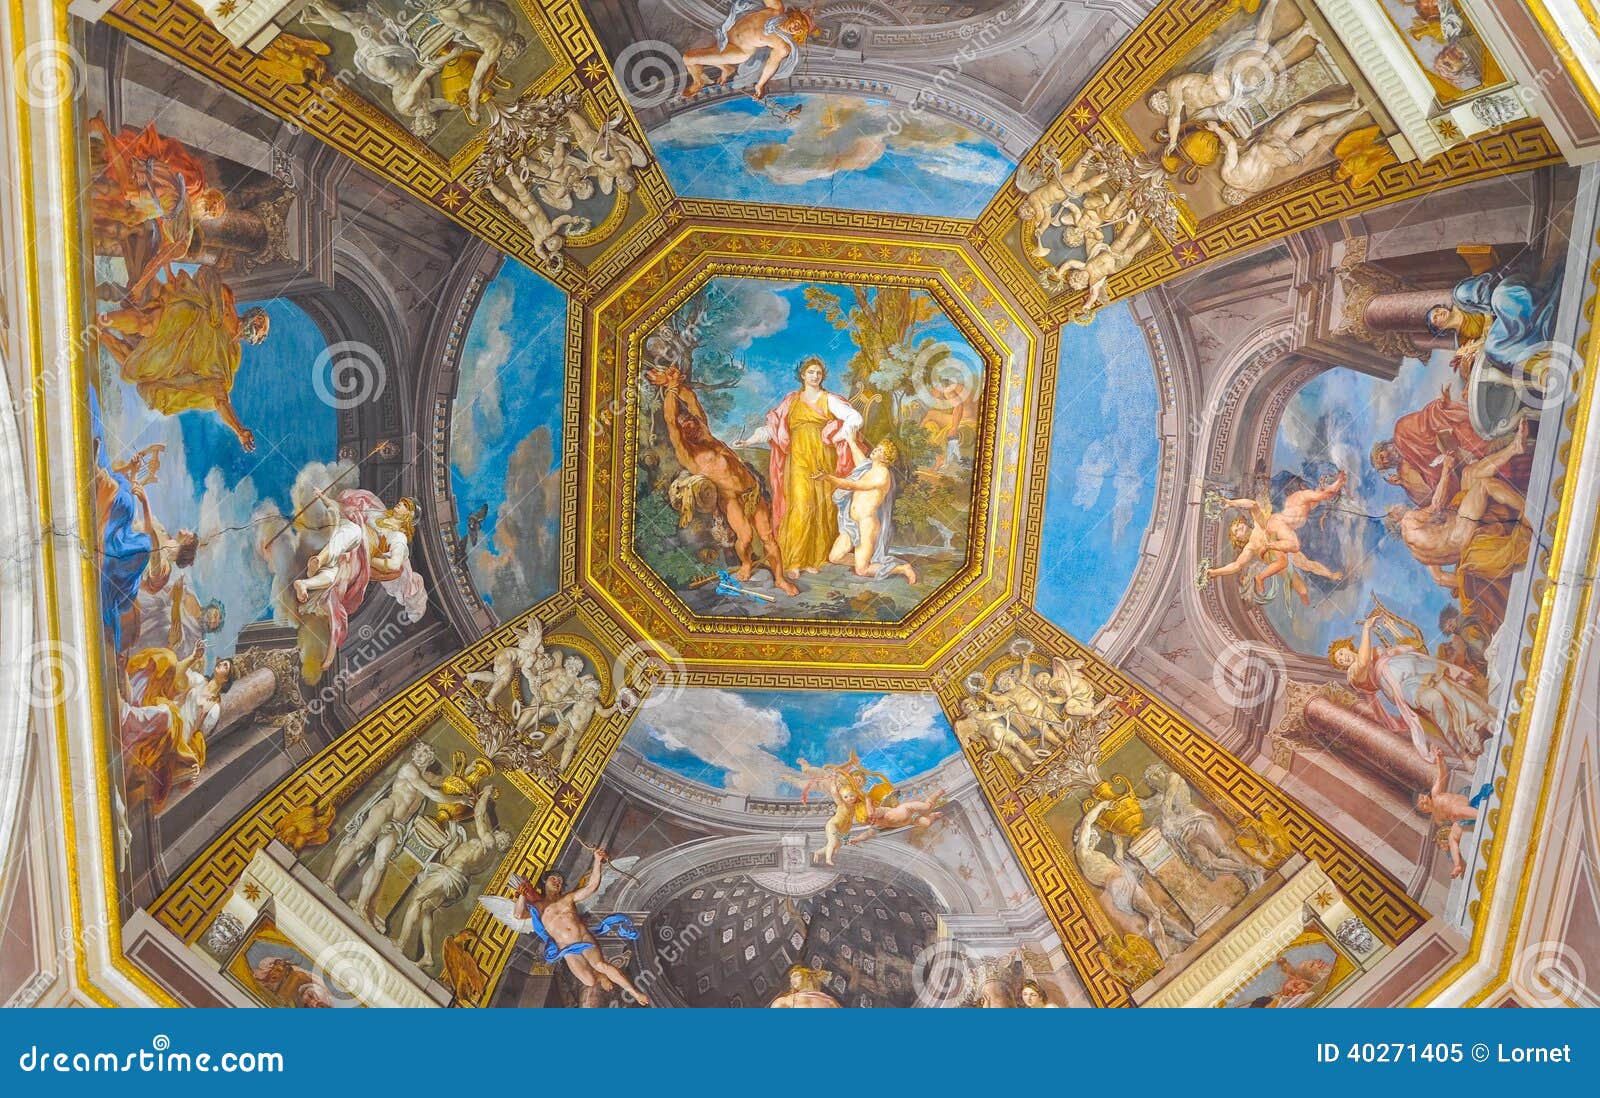 Ceiling Painting In Vatican Stock Image Image Of Painted